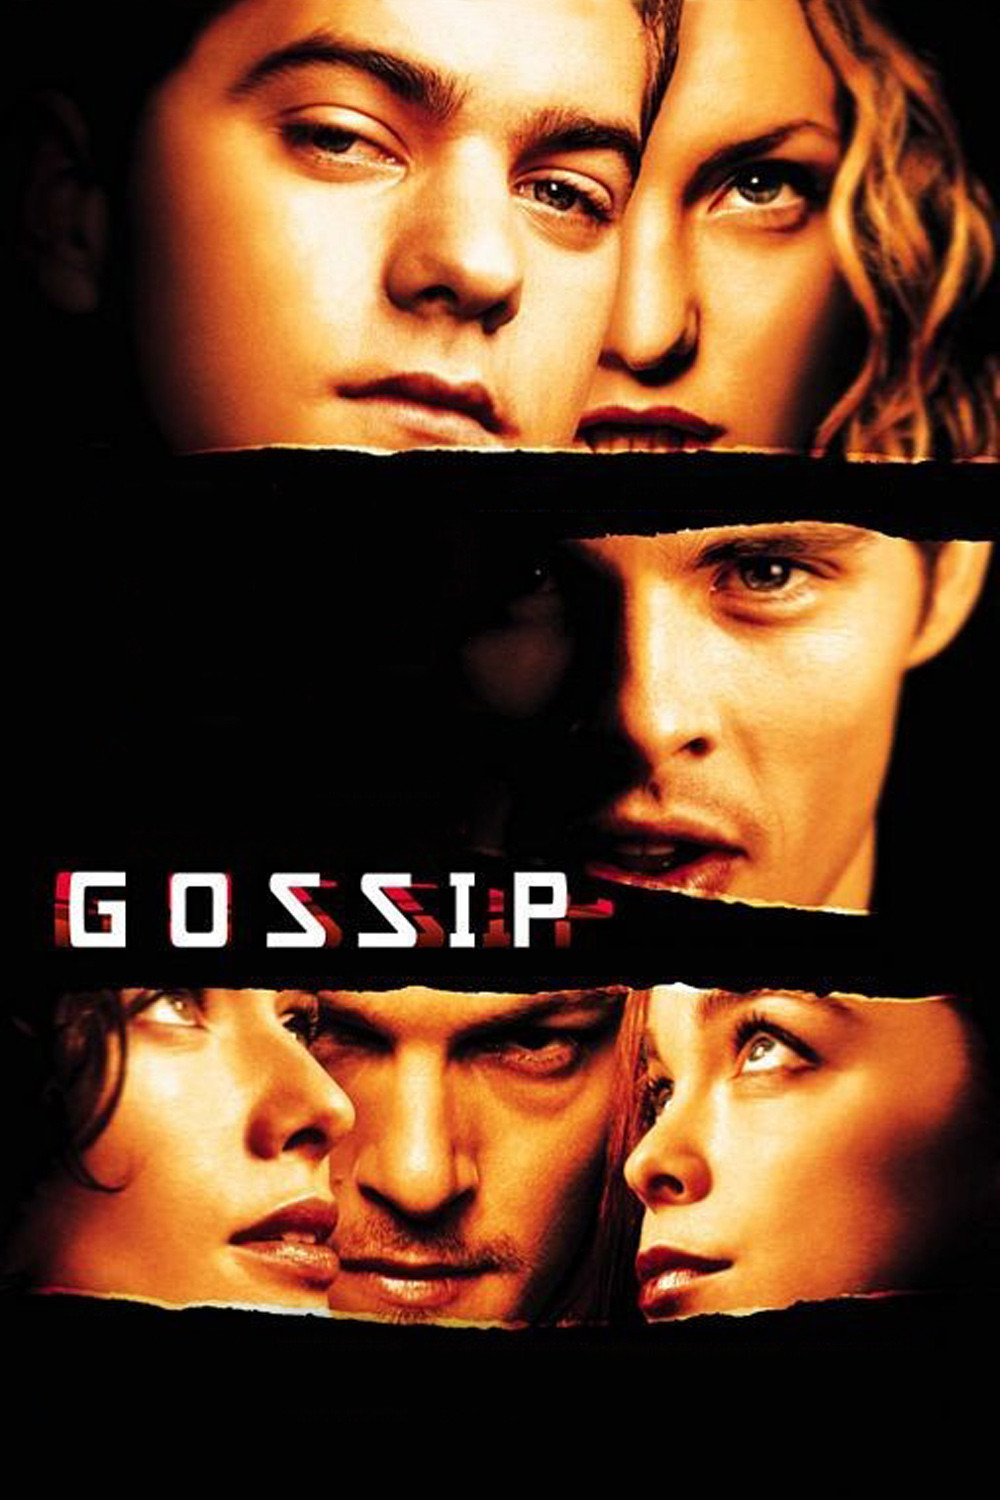 Poster for the movie "Gossip"